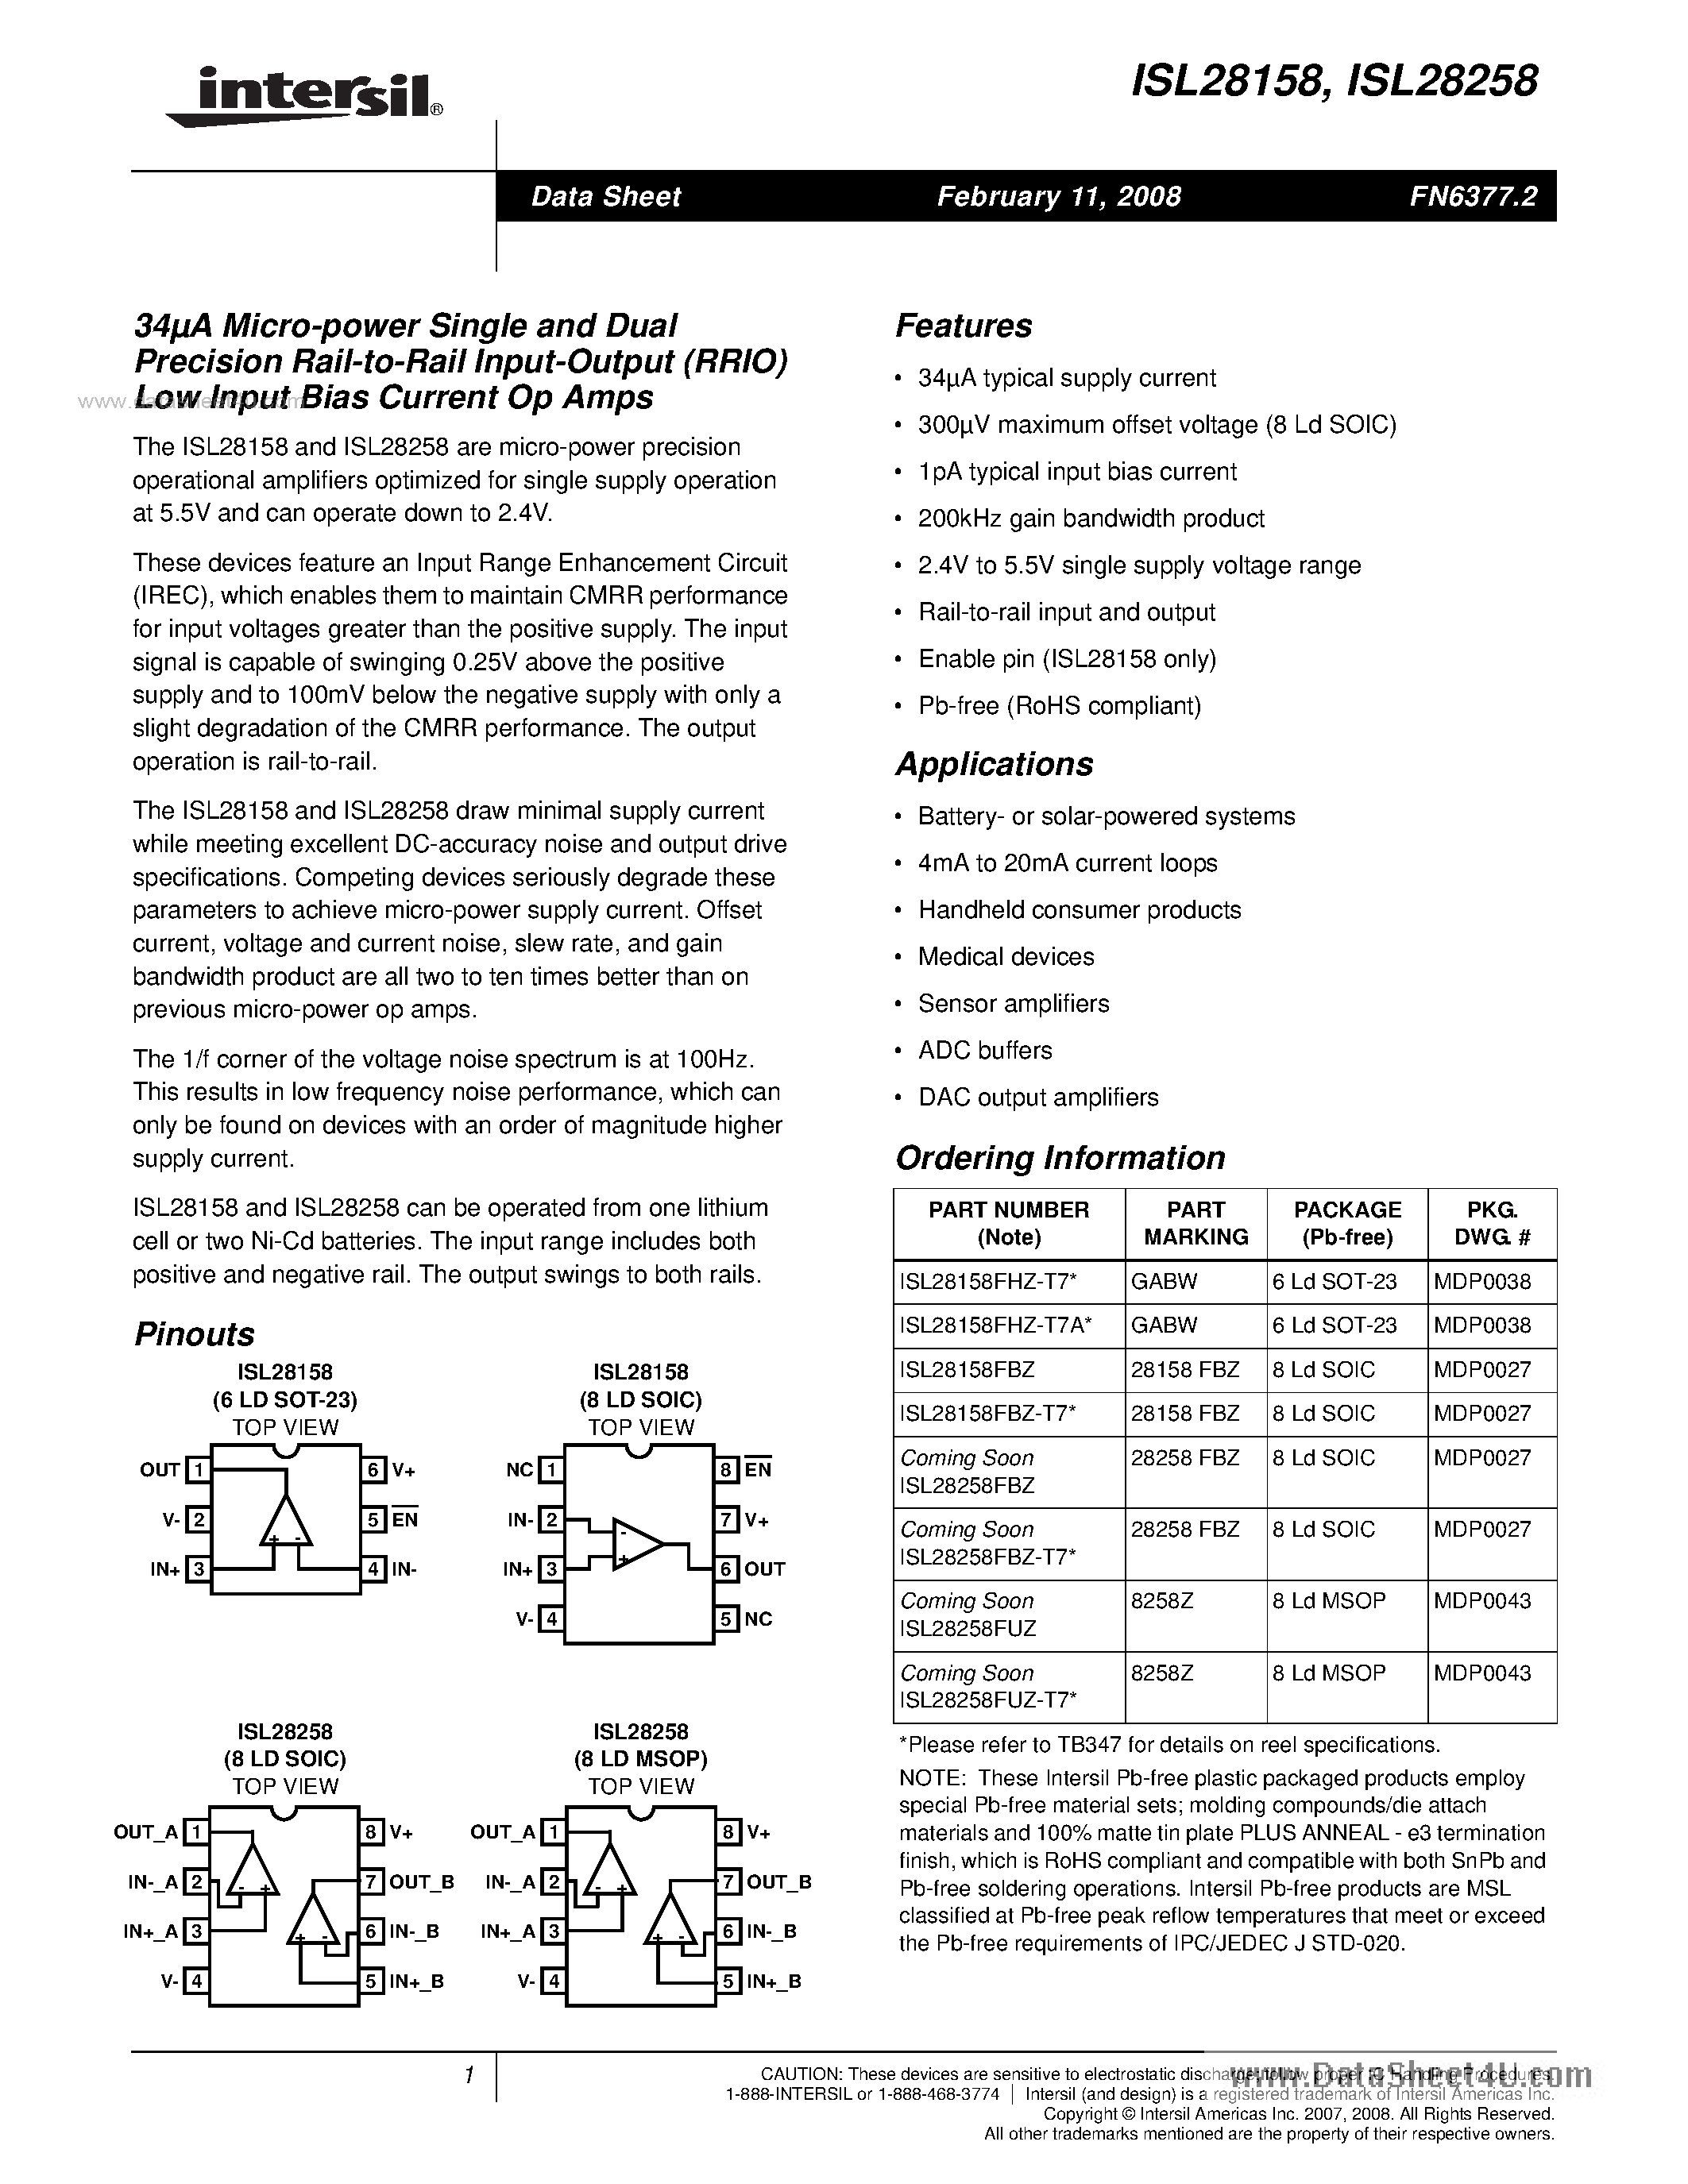 Datasheet ISL28258 - (ISL28158 / ISL28258) Micro-power Single and Dual Precision Rail-to-Rail Input-Output (RRIO) Low Input Bias Current Op Amps page 1